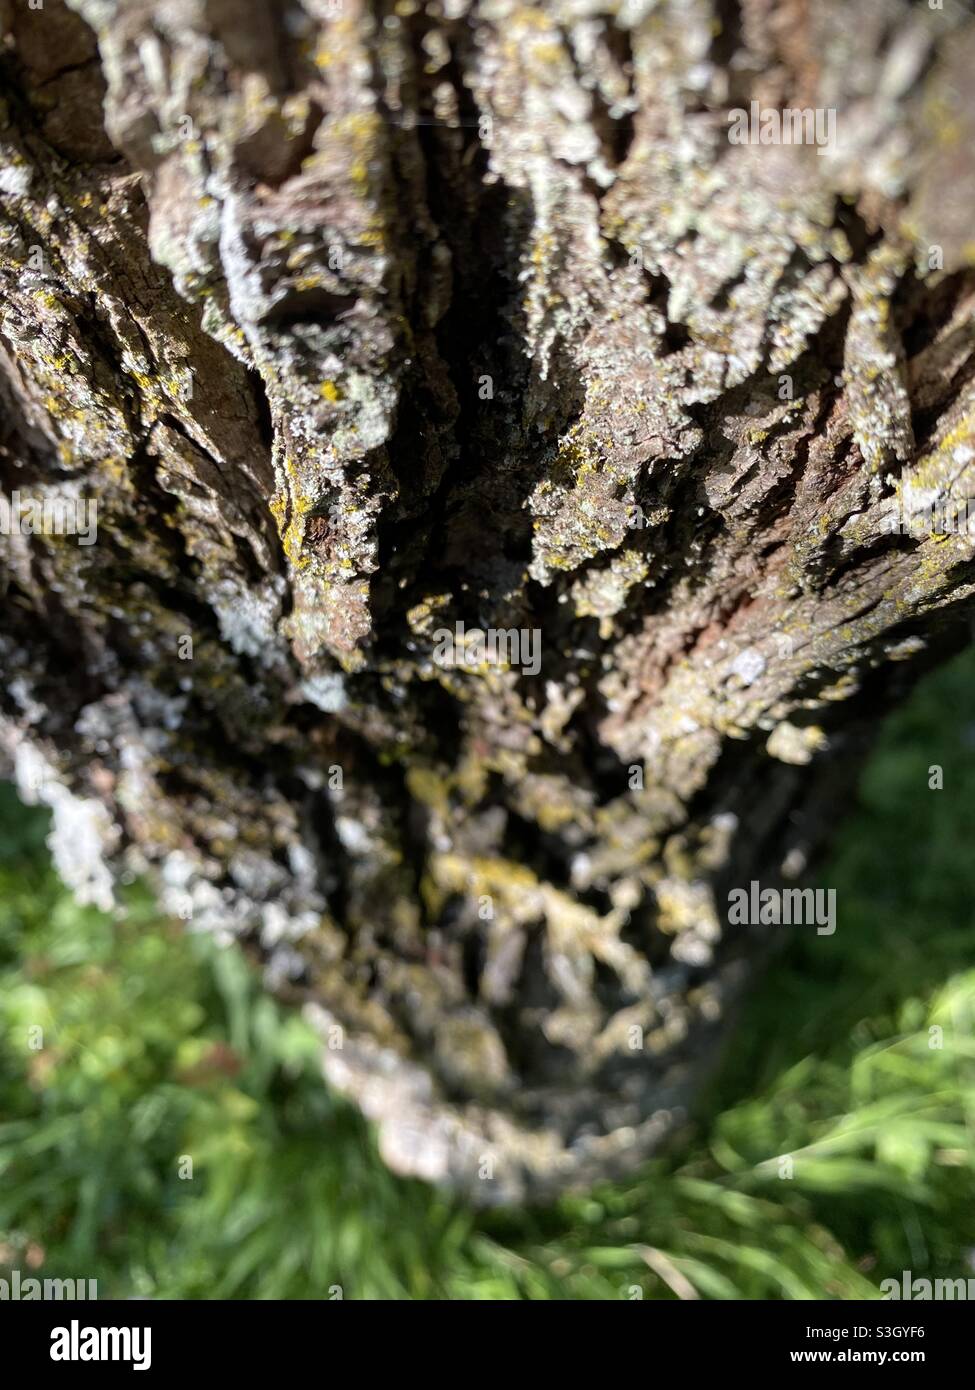 Looking down a tree trunk nature photography Stock Photo